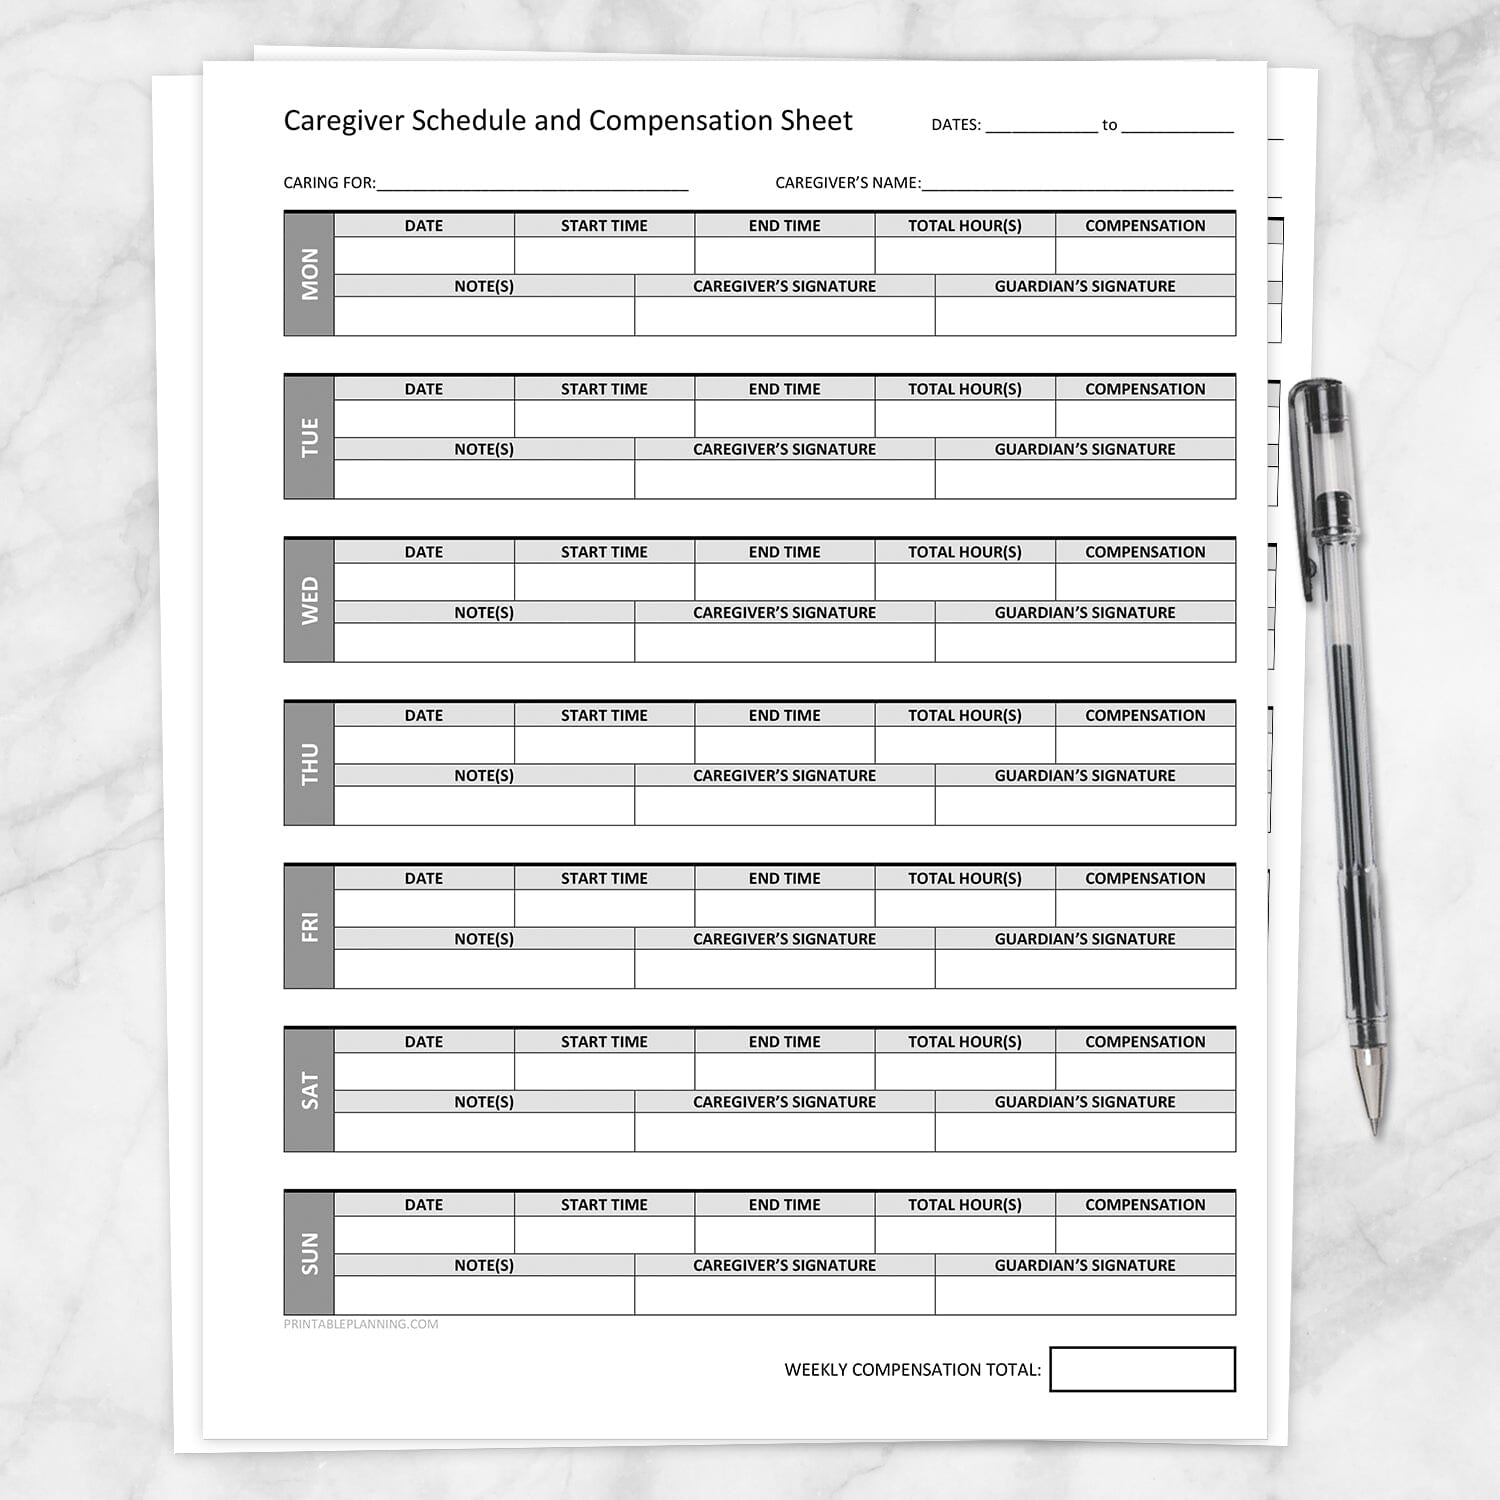 Printable Caregiver Schedule and Compensation Sheet at Printable Planning. A printable weekly Caregiver Schedule and Compensation sheet. This printable page allows you to keep a weekly schedule for your caregiver and then log their hours, compensation, any relevant notes, and have the caregiver and guardian sign off on the day. The days run Monday through Sunday, top to bottom. There is a box at the bottom to log a total for the week in compensation paid to the caregiver. 